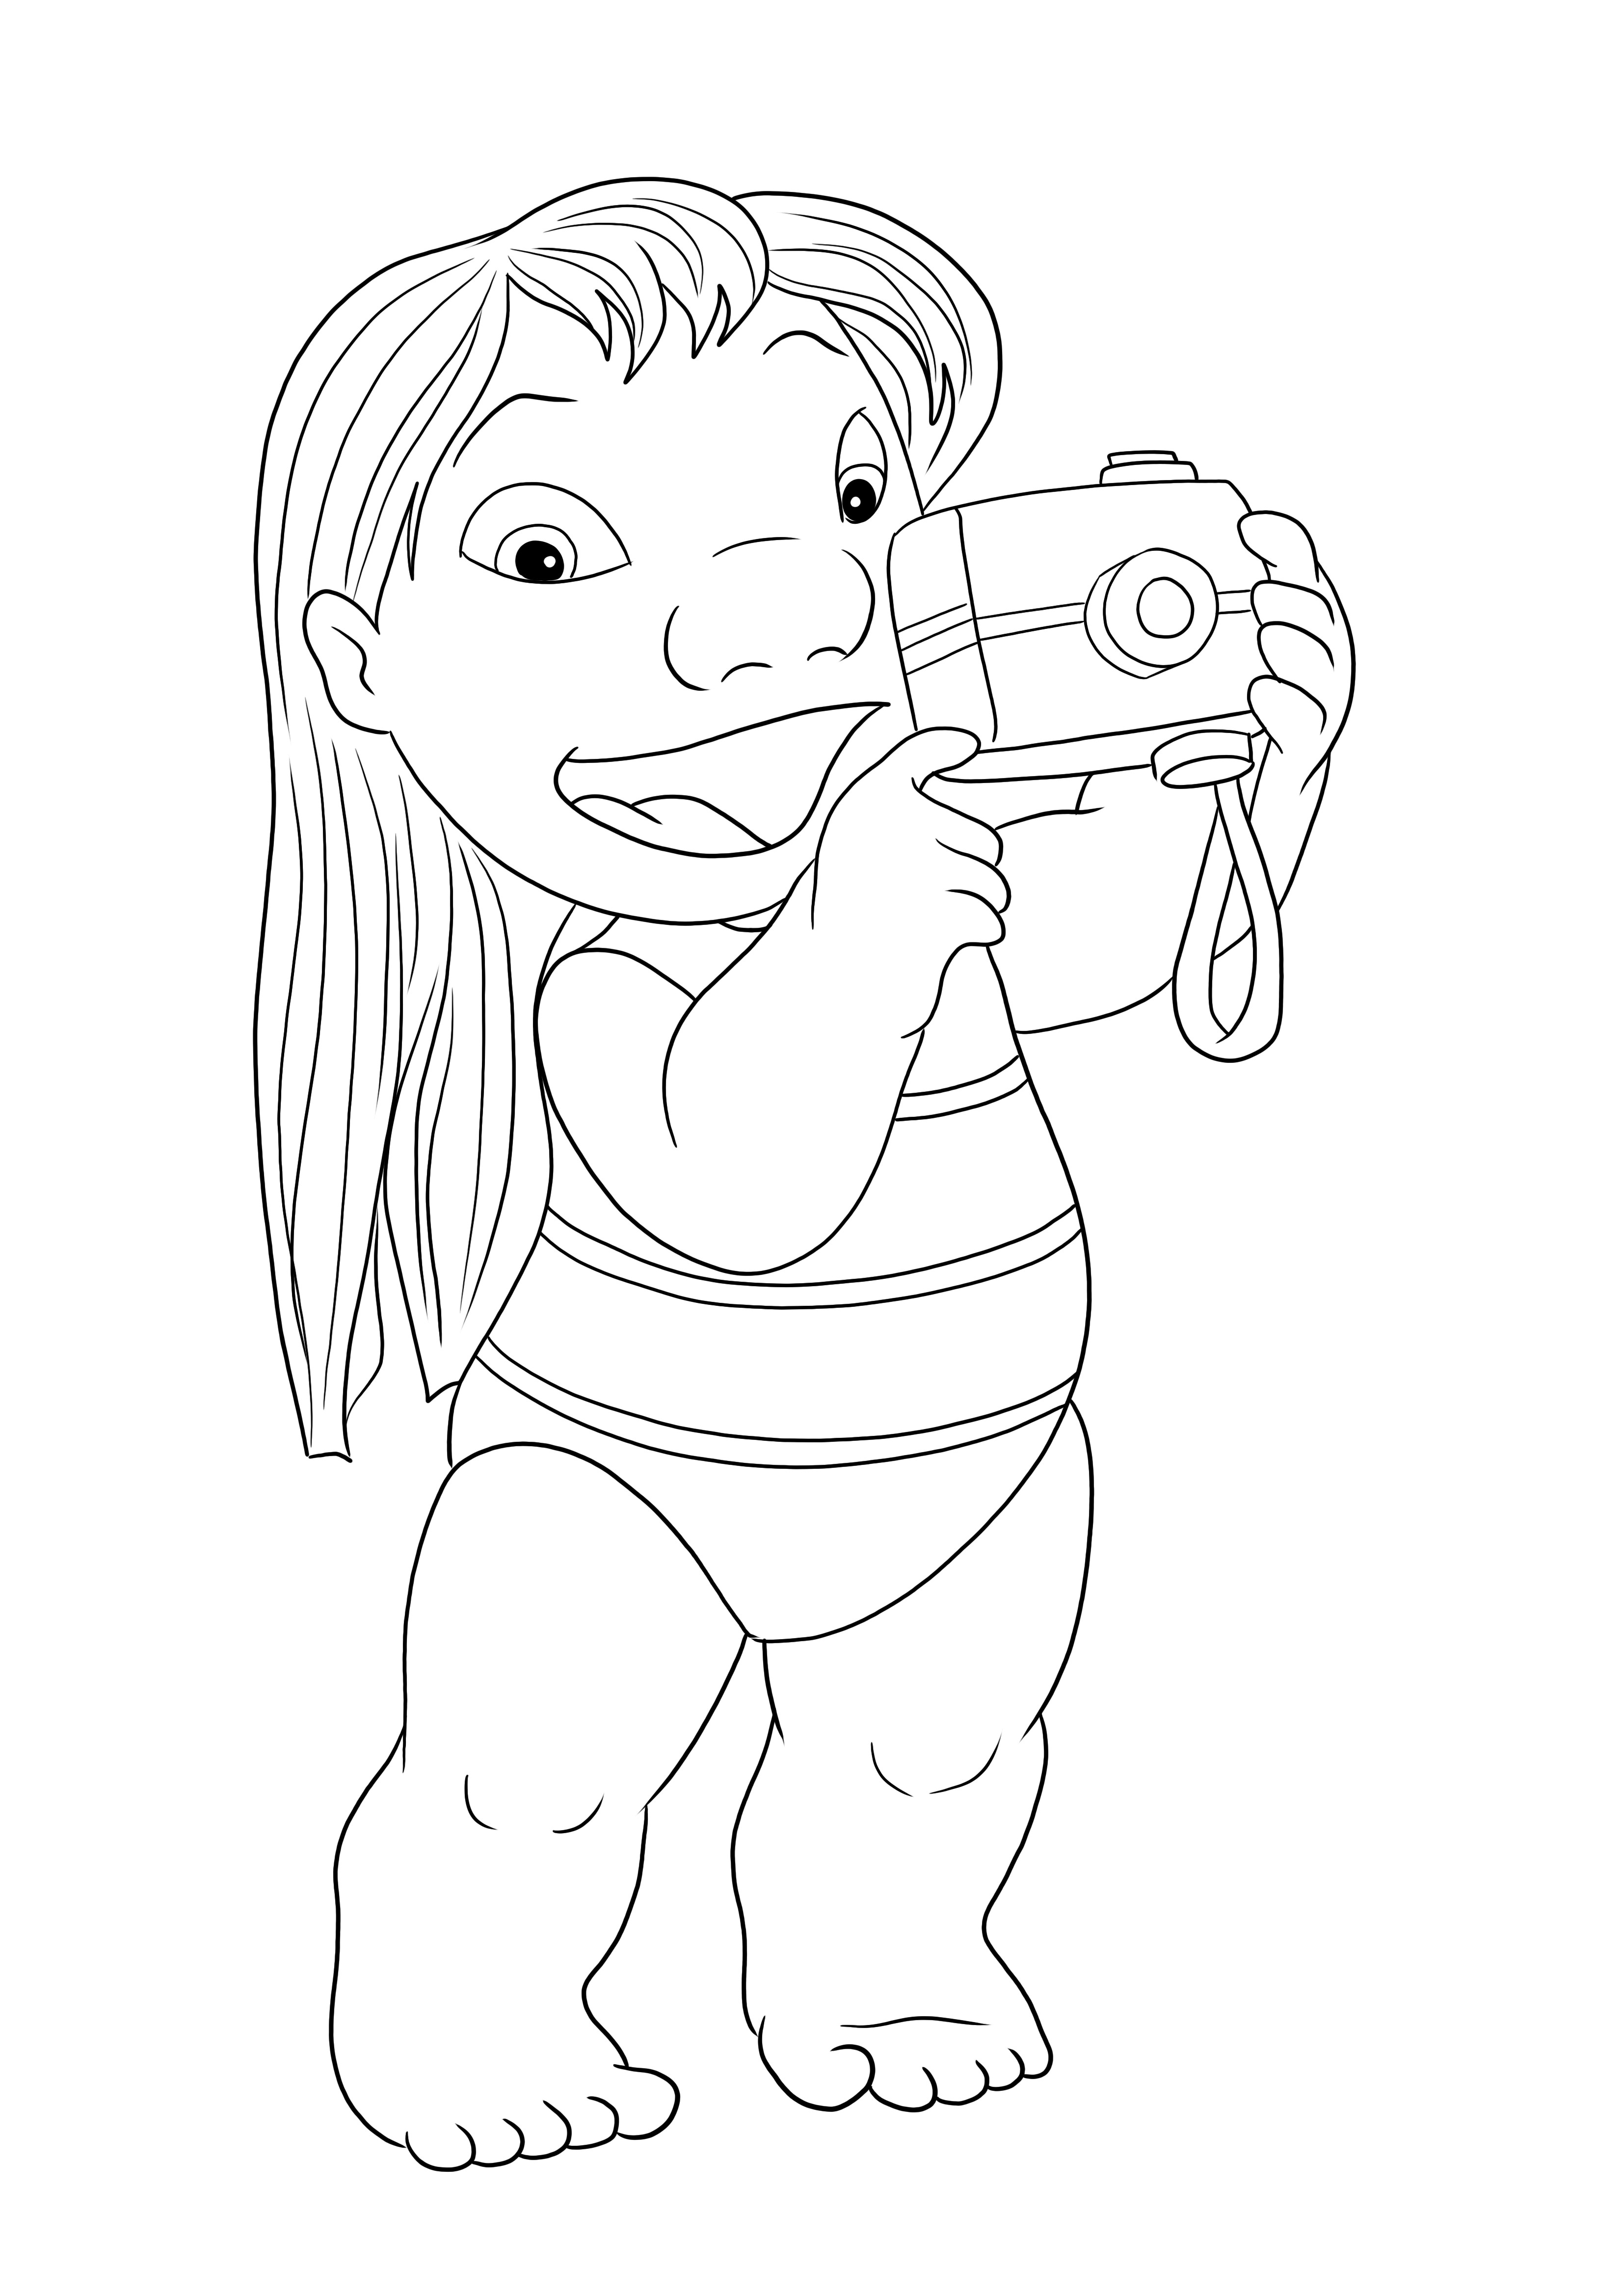 Lilo is taking a picture coloring page for free downloading and printing